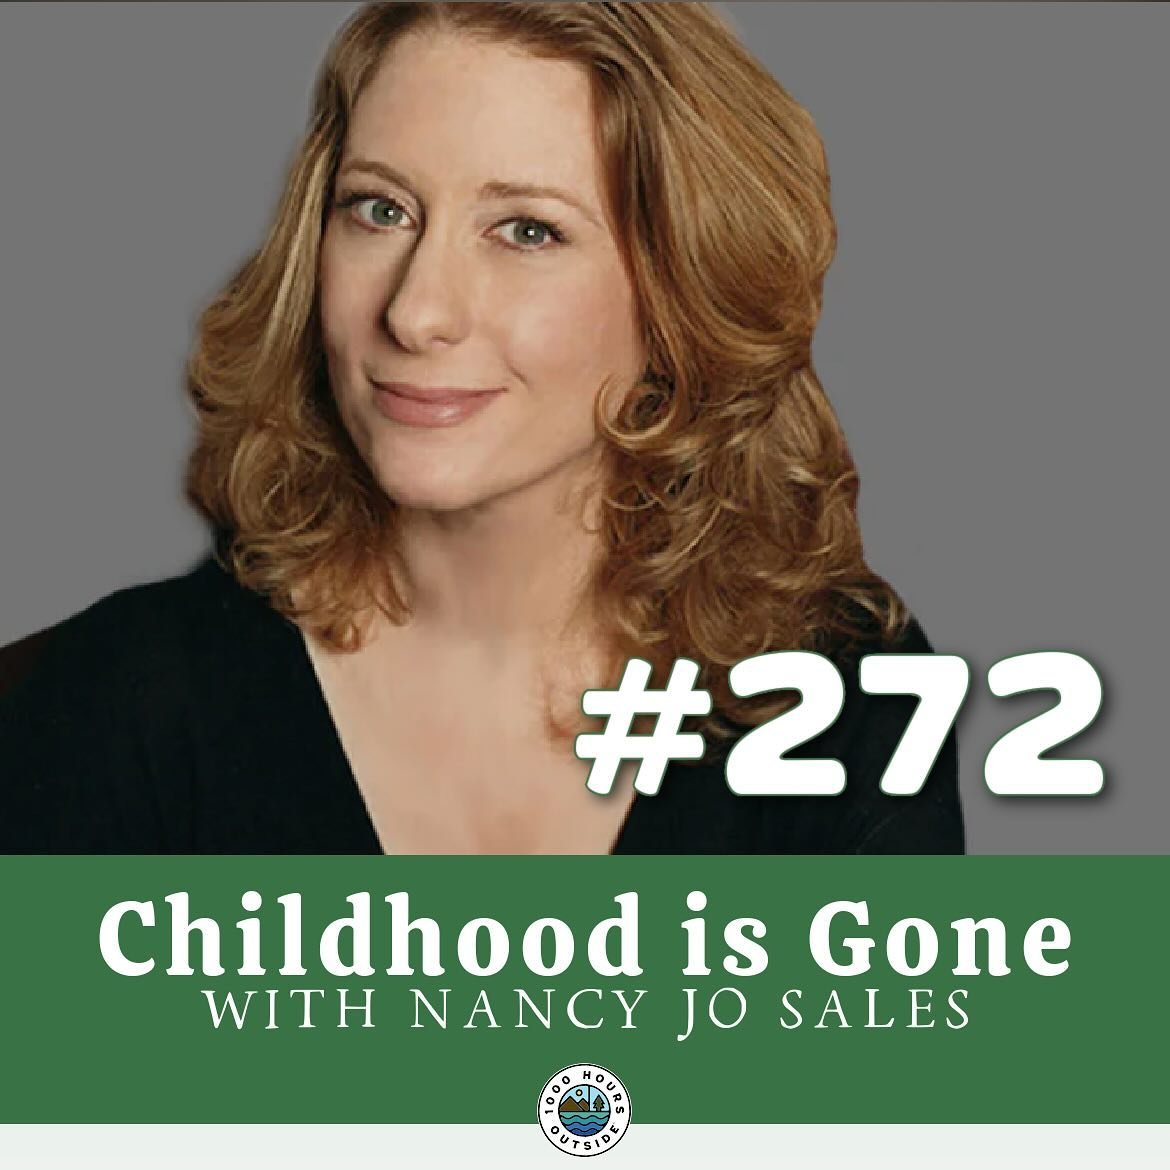 Share a favorite ➡️ (or several favorites!)

And then tune in for this critically important conversation! Comment &lsquo;childhood&rsquo; to get a link right to it!

It was an honor to get an hour with @nancyjosales . Her book is a must read for pare